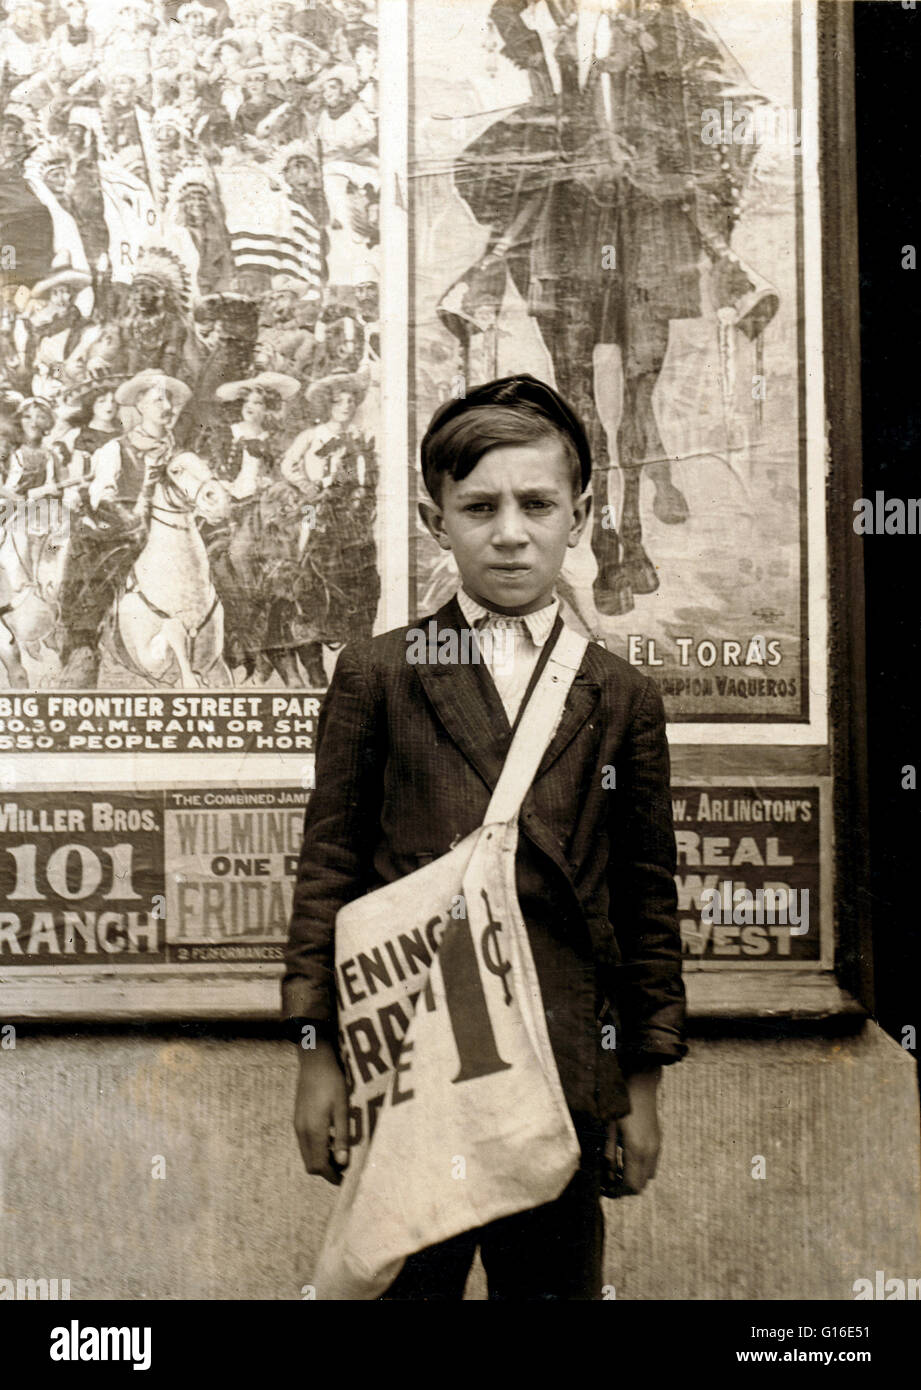 Entitled: 'S. Russell, 33 East 22nd Street. Newsboy, 12 years of age. Selling newspapers 2 years. Average earnings 20 cents daily. Selling newspapers own choice. Father earns $18 weekly. Boy deposits earnings in du Pont Savings Bank, and on Saturday night Stock Photo